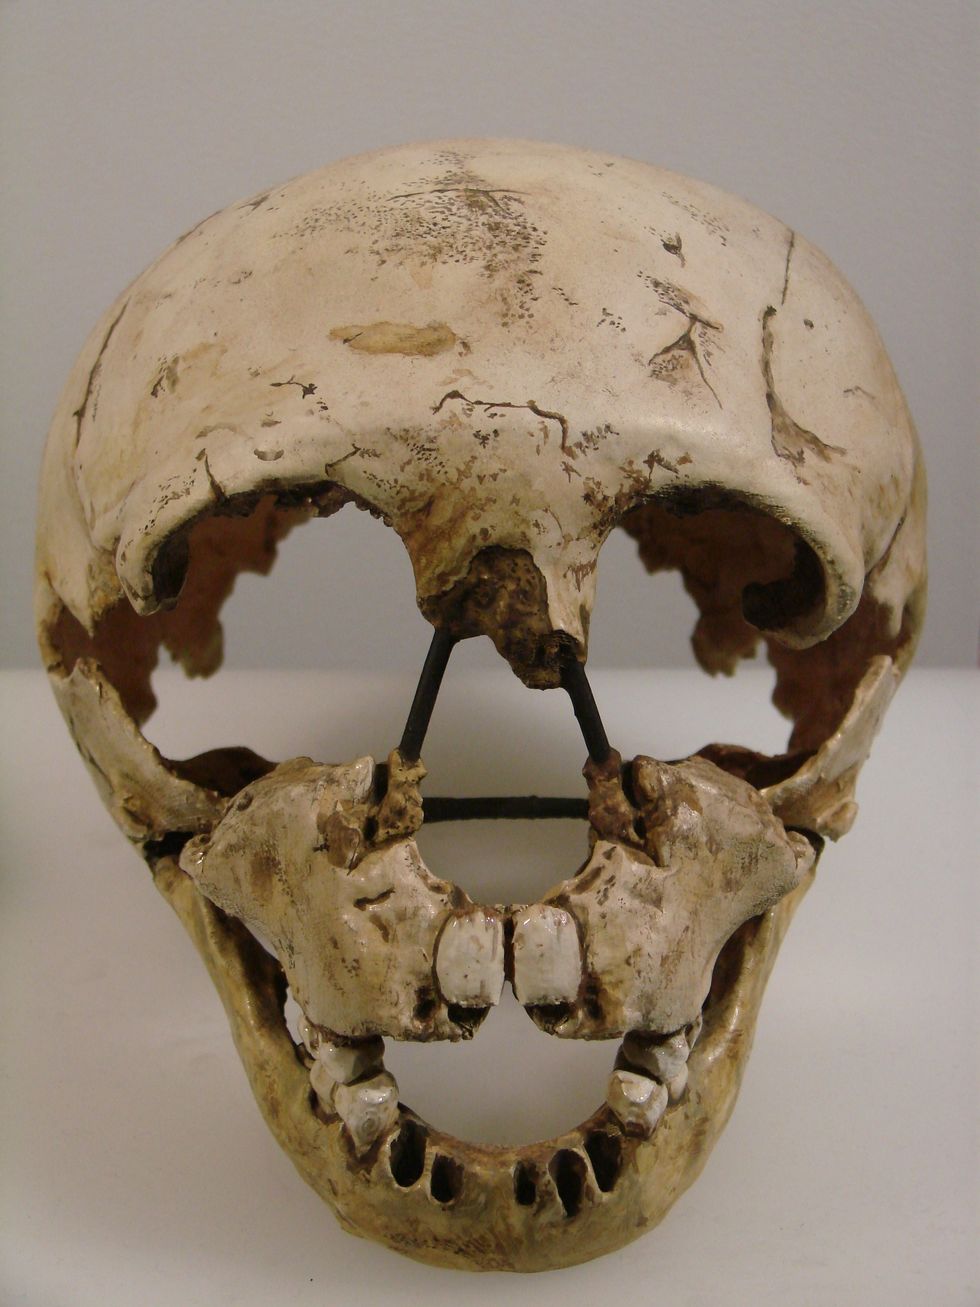 A Review Of The Article 'Neanderthals And Modern Behavior'